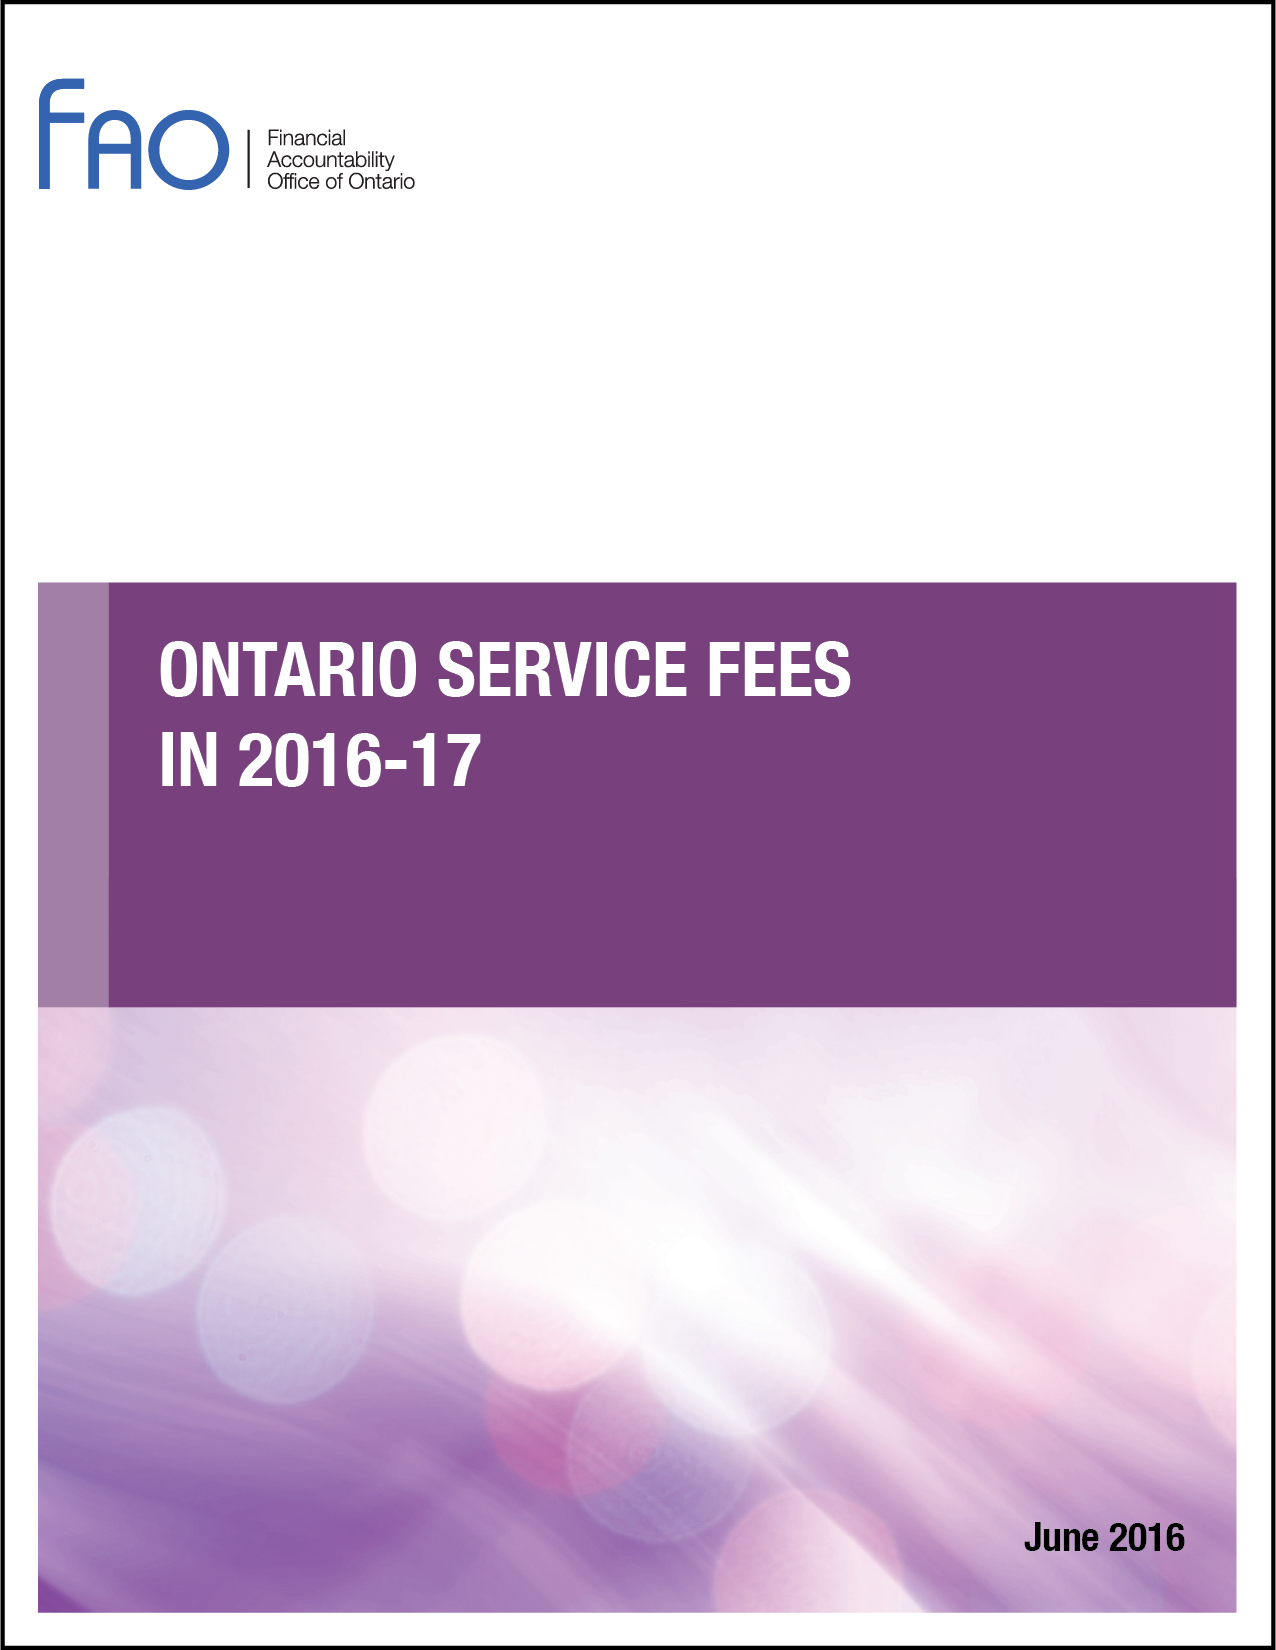 Ontario Service Fees in 2016-17